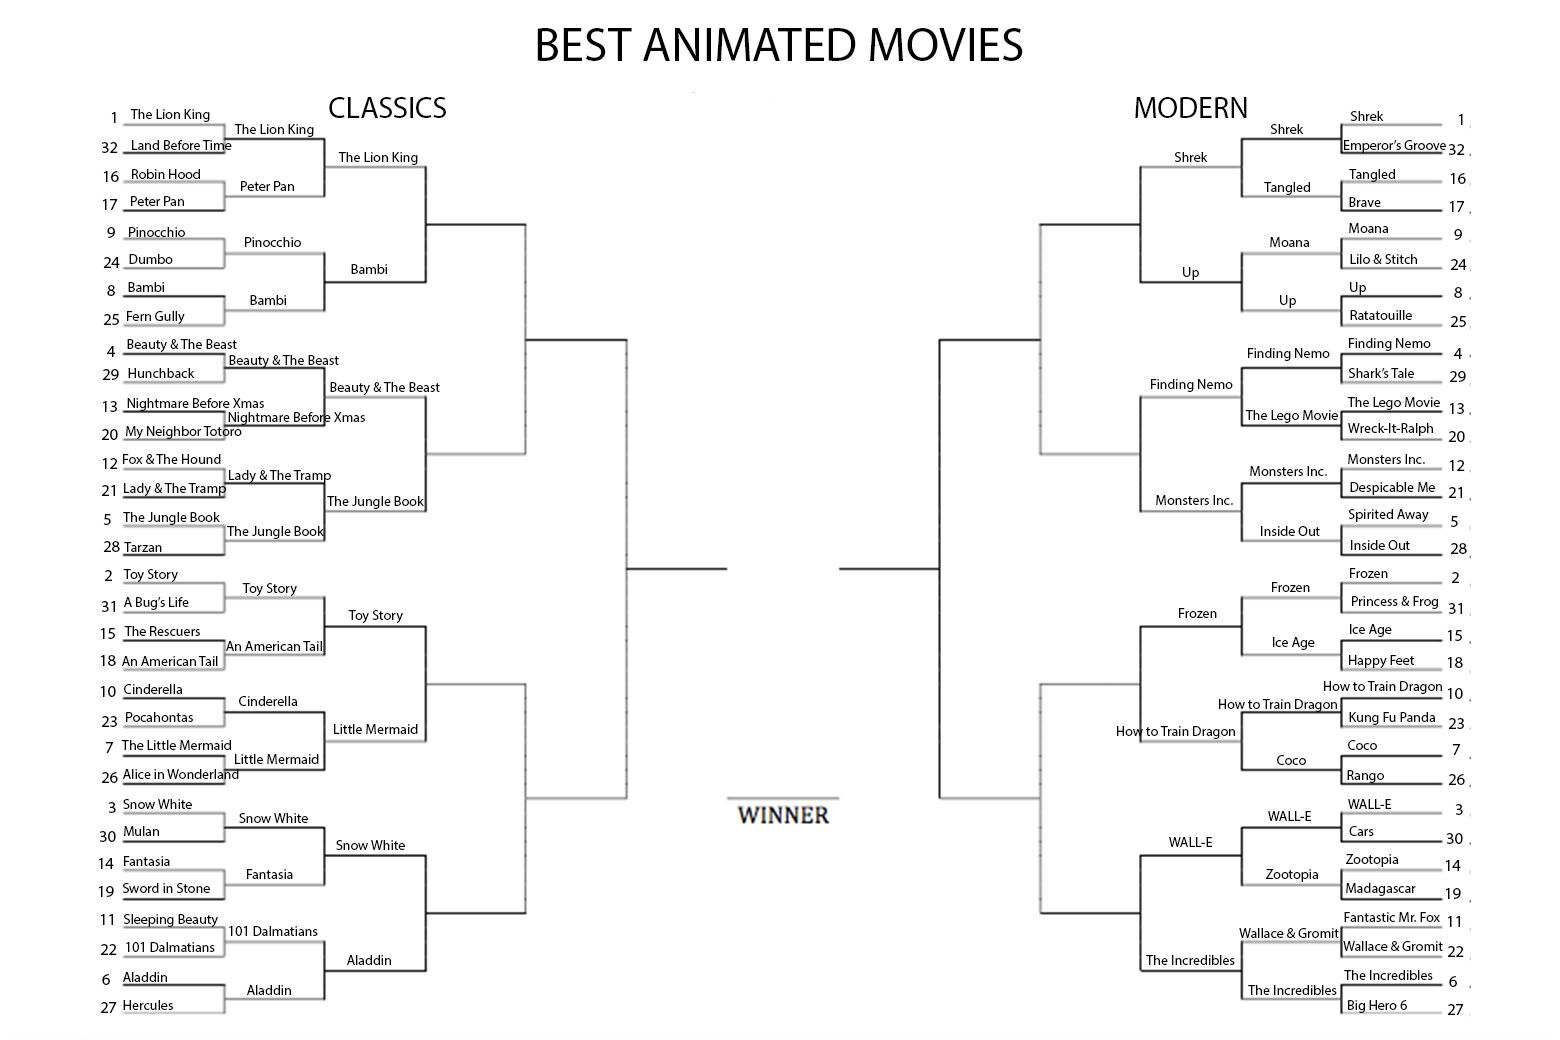 March Madness Best Animated Movies (Sweet 16) WTOP News